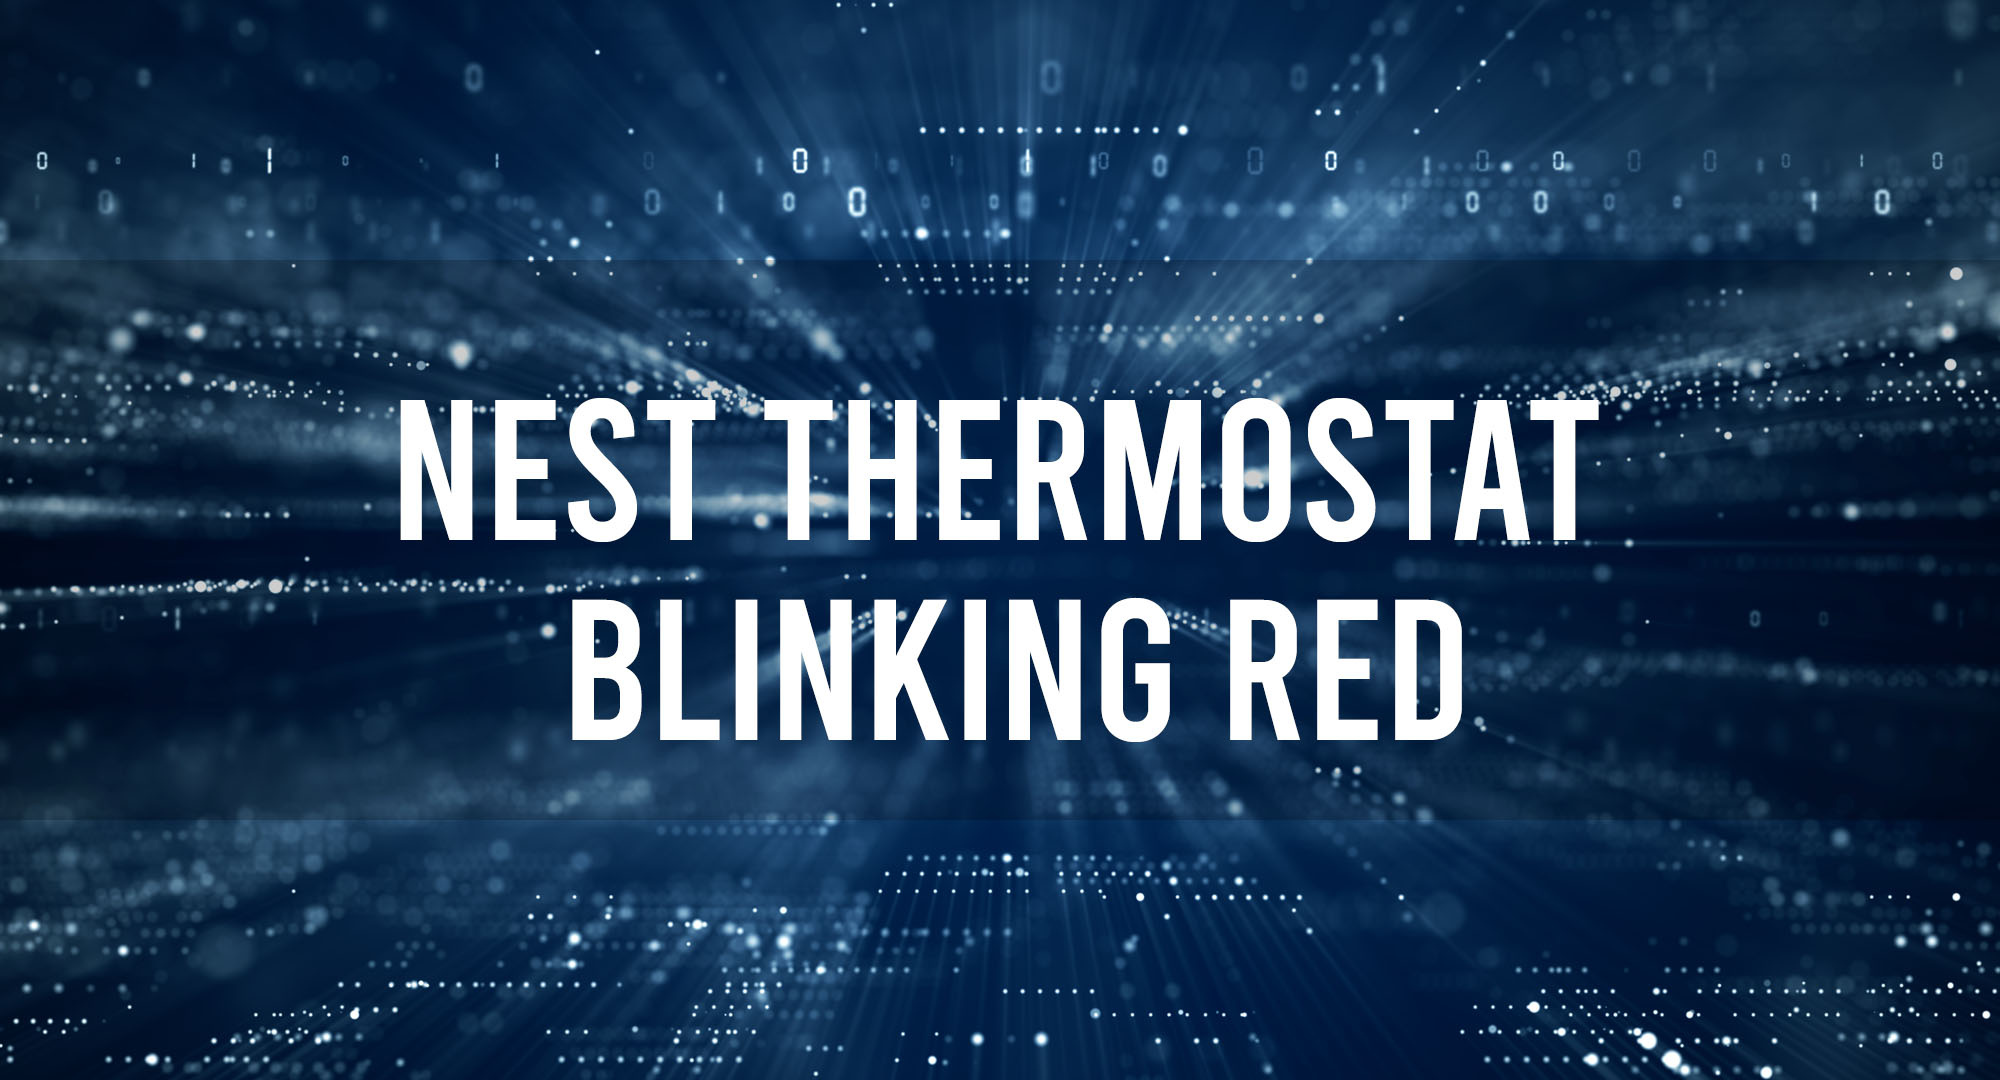 Nest Thermostat Blinking Red